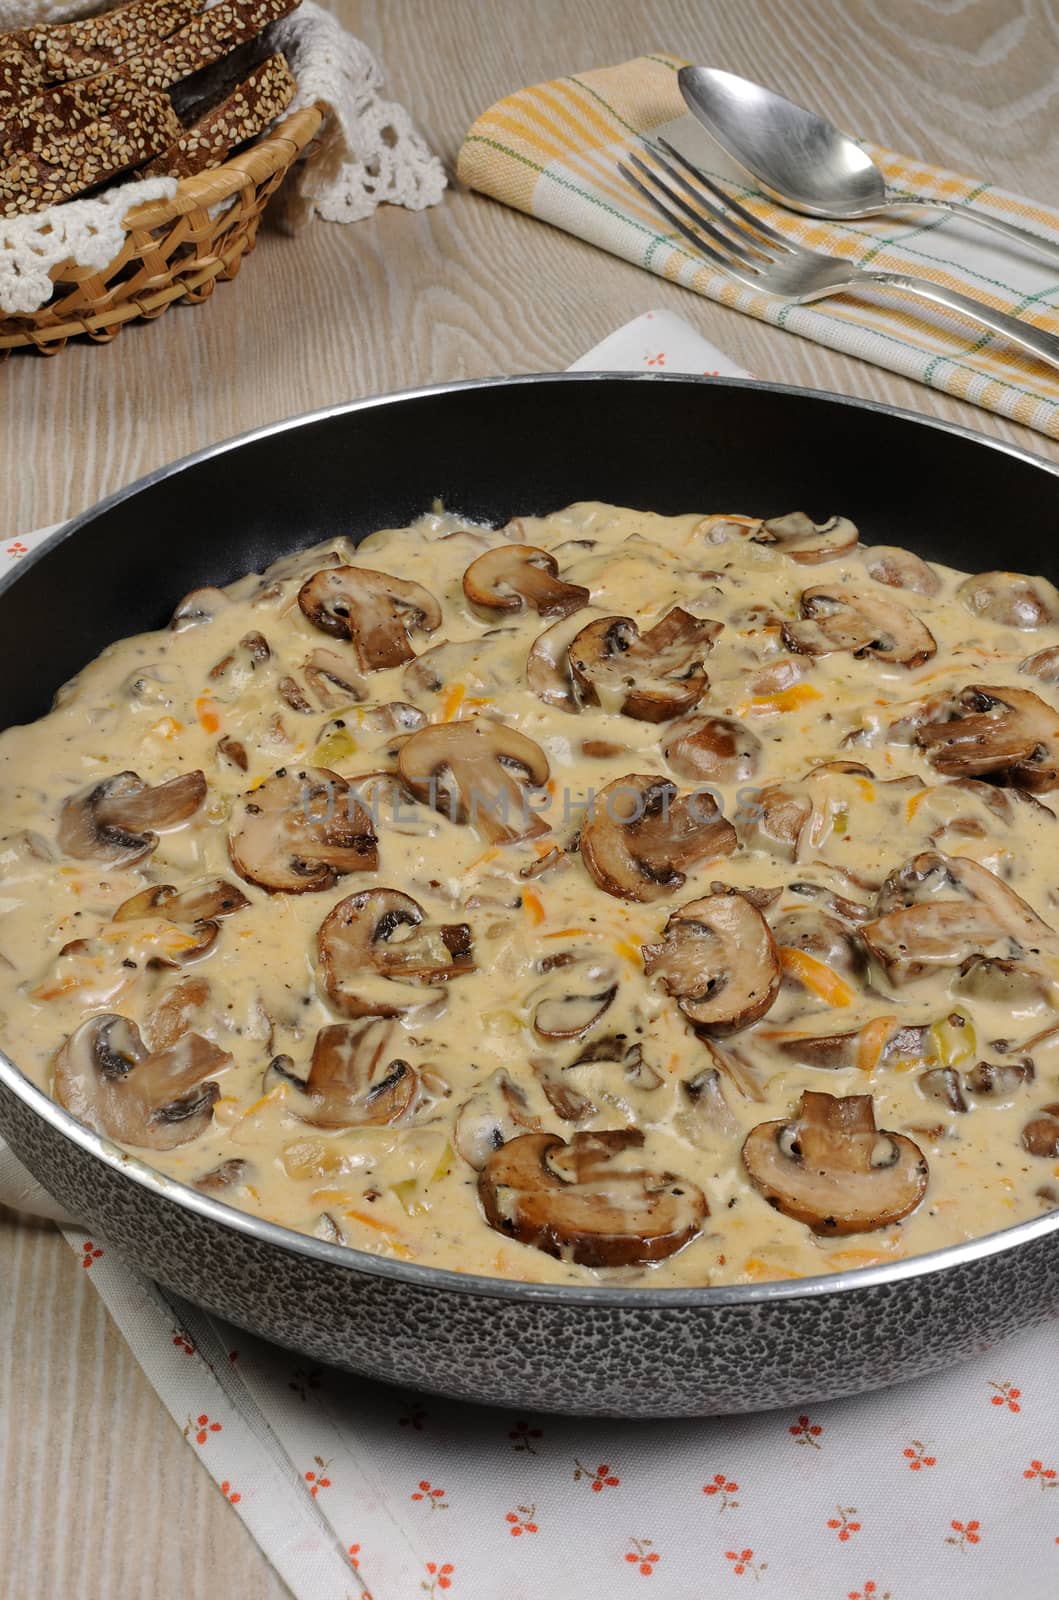 Fried mushrooms in a creamy sauce by Apolonia